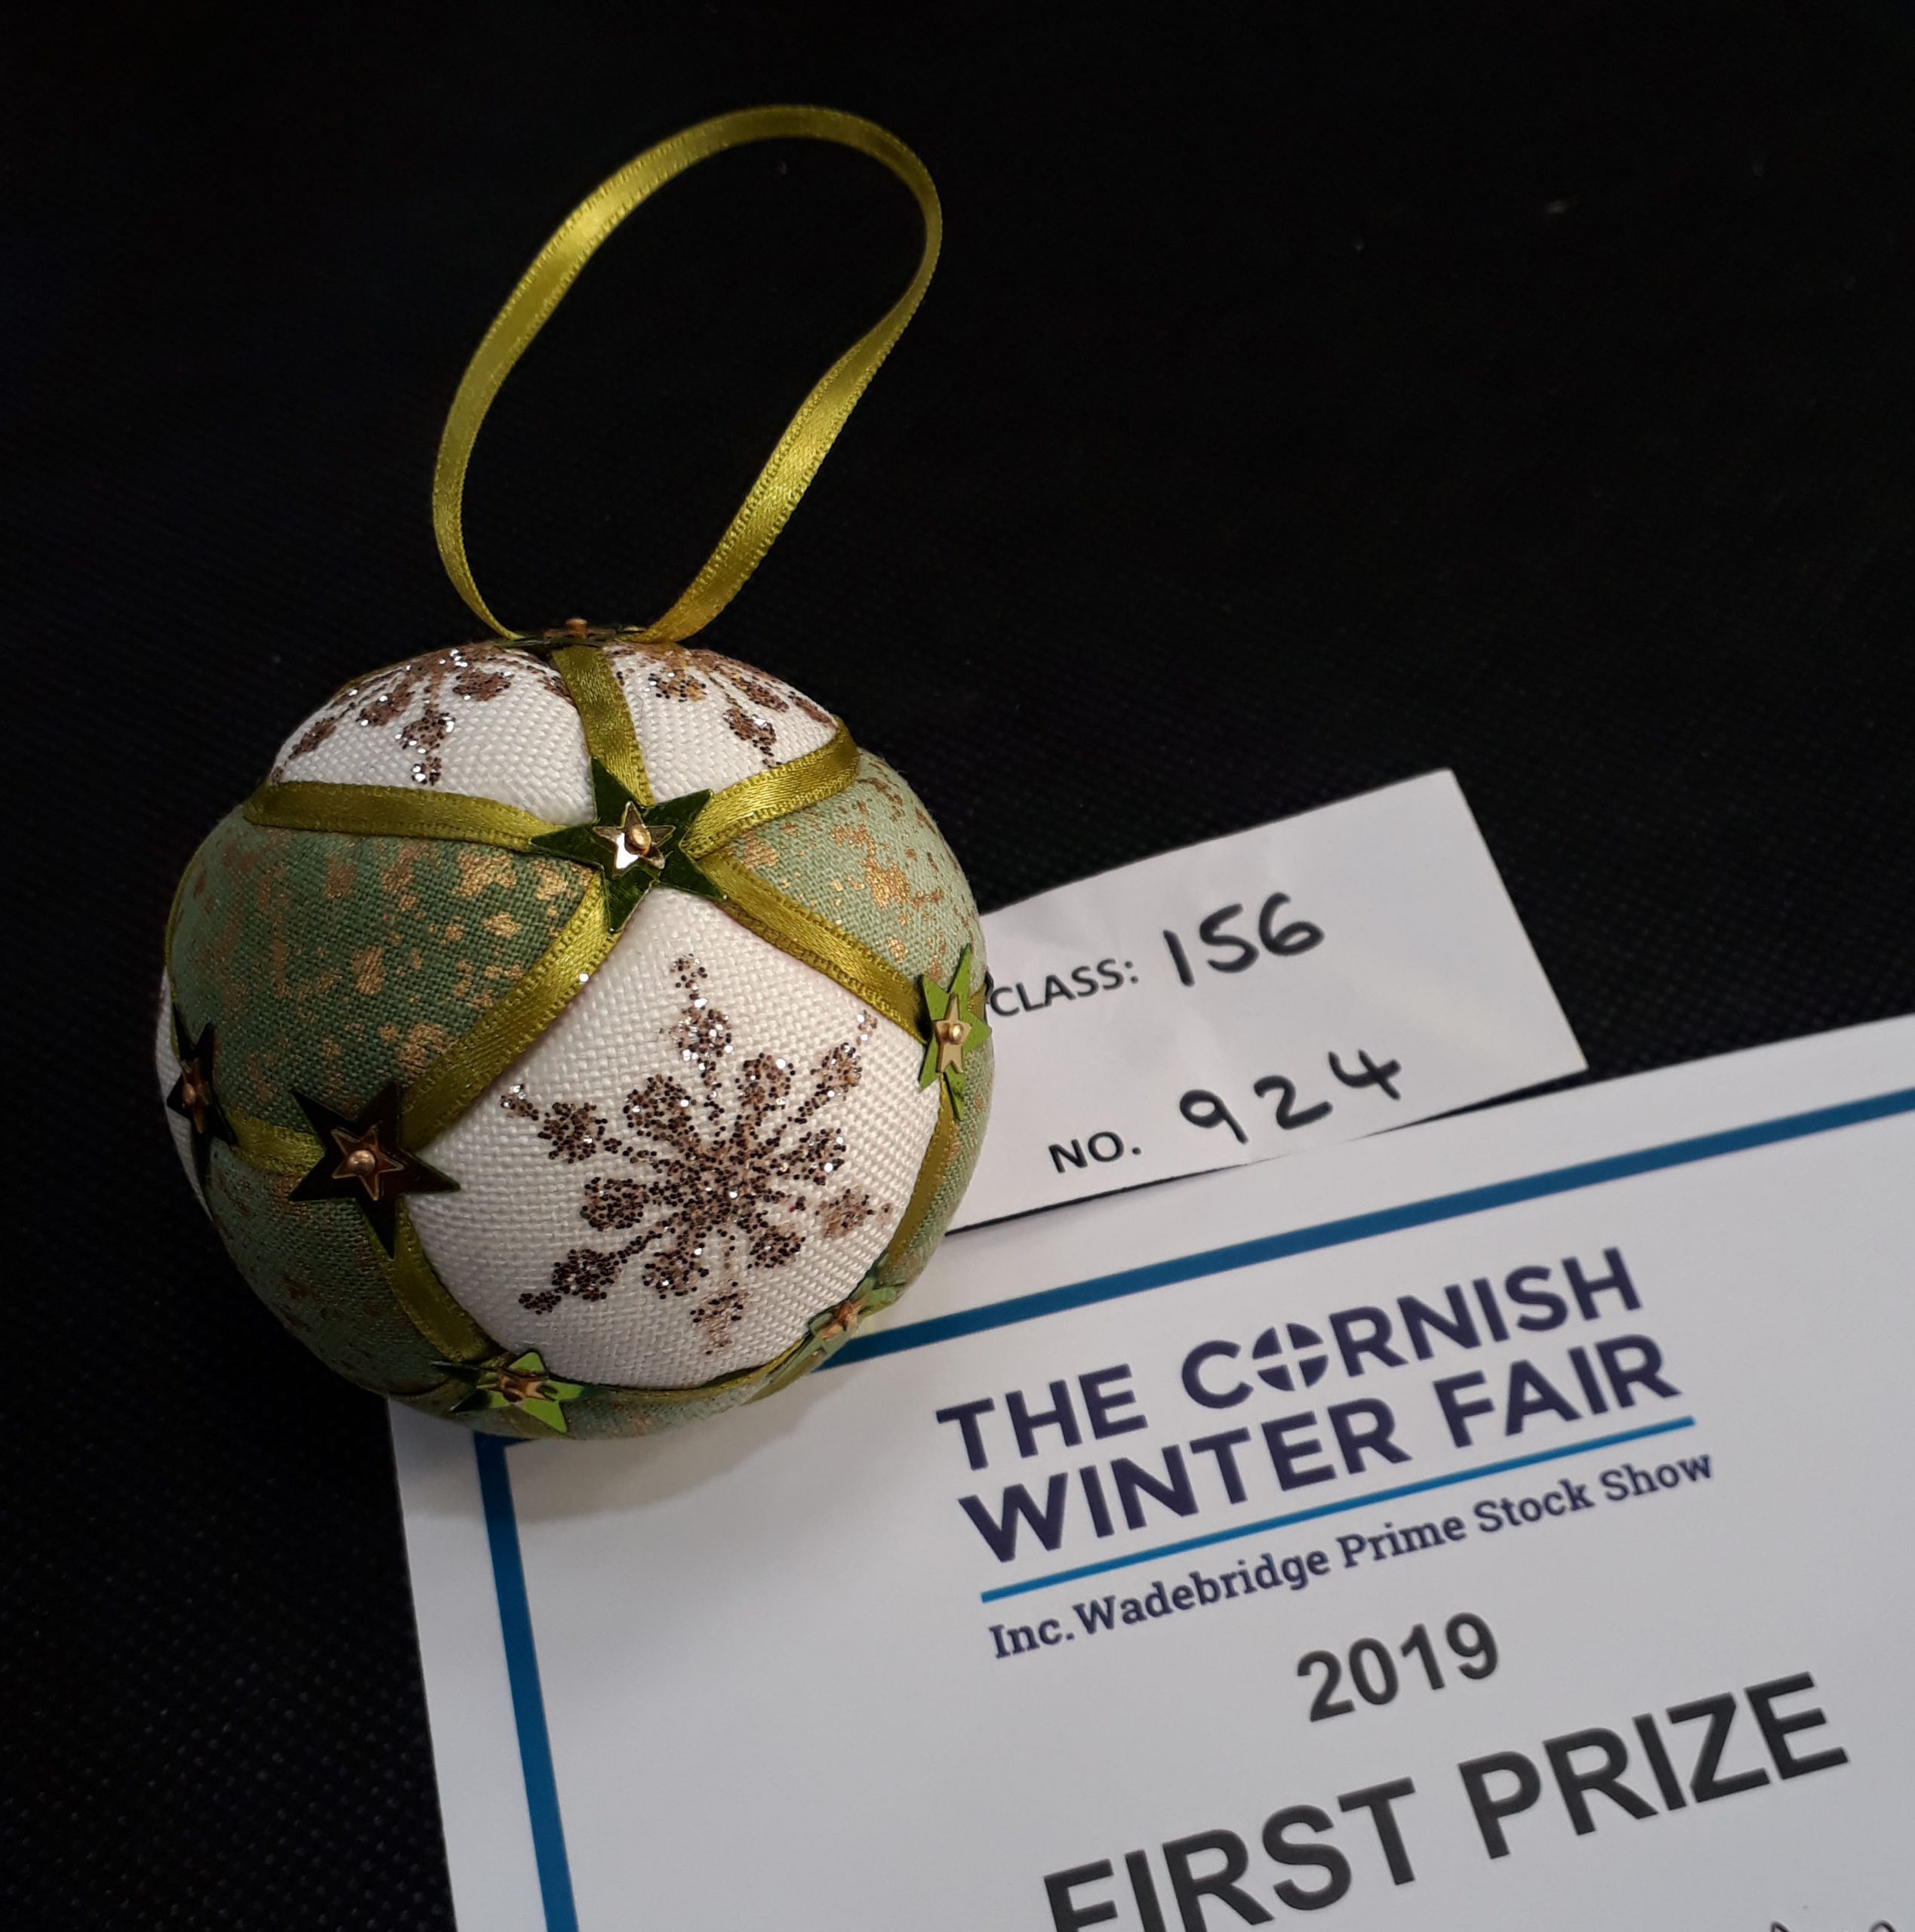 Cornish Winter Fair WI Competitions Schedules! CORNWALL FEDERATION OF